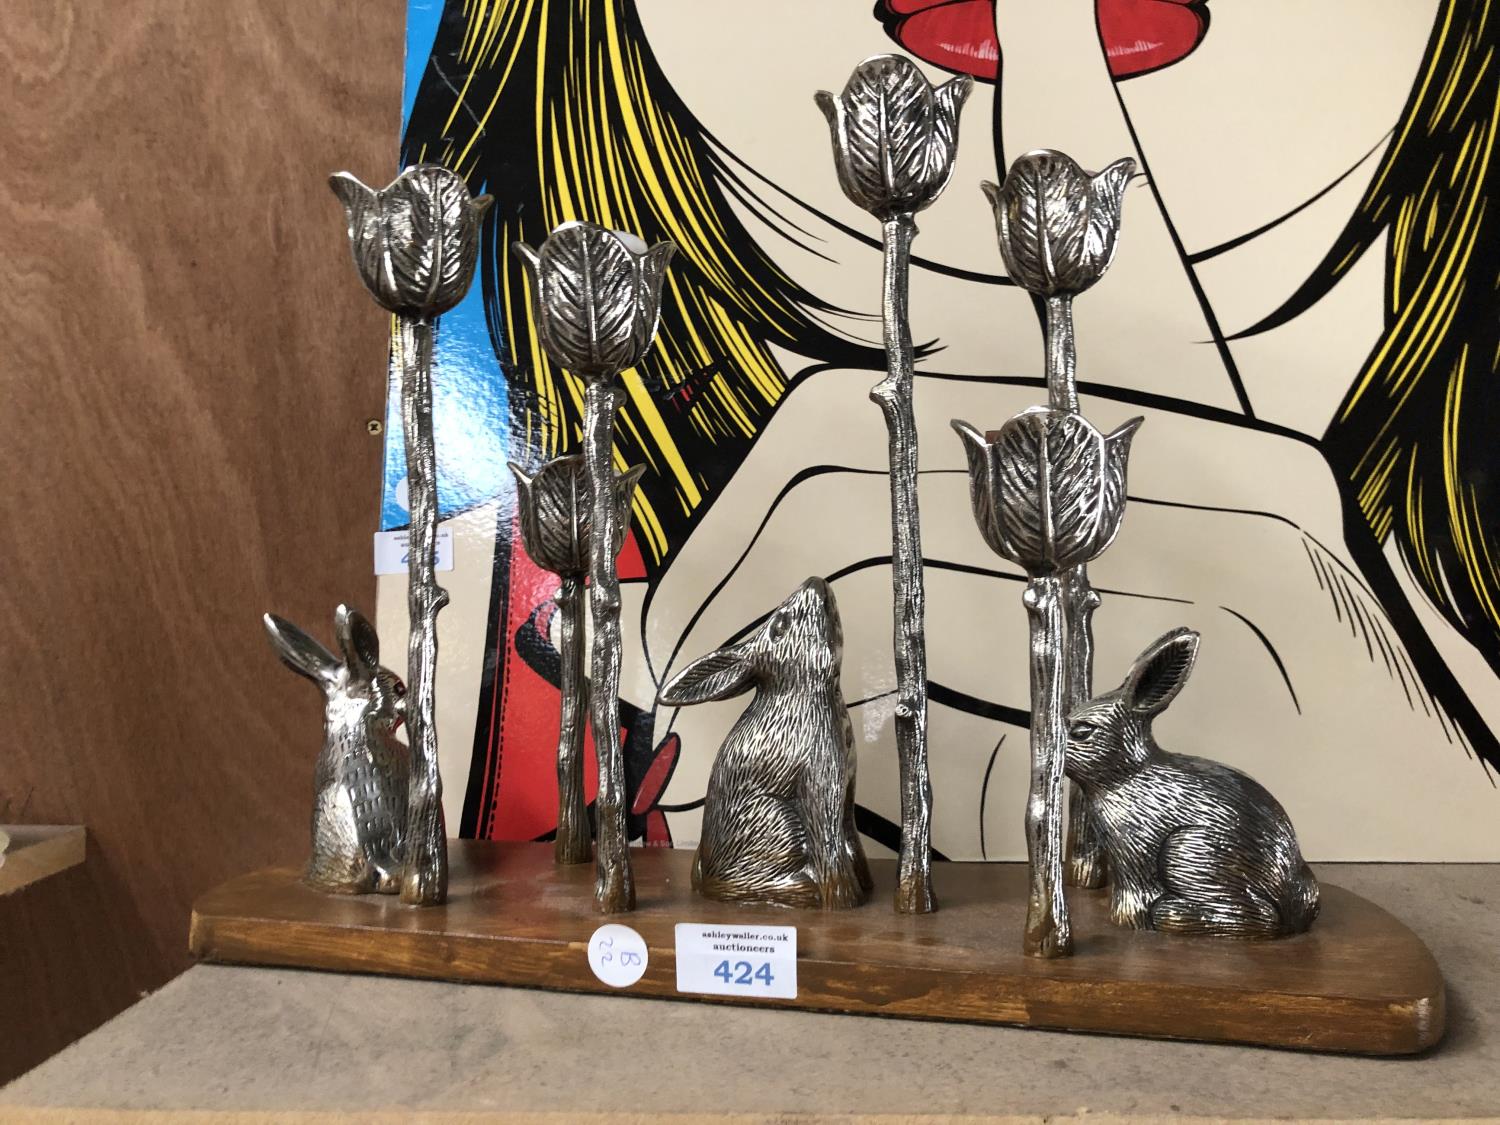 A SILVER PLATED CANDELABRA WITH RABBIT DESIGN